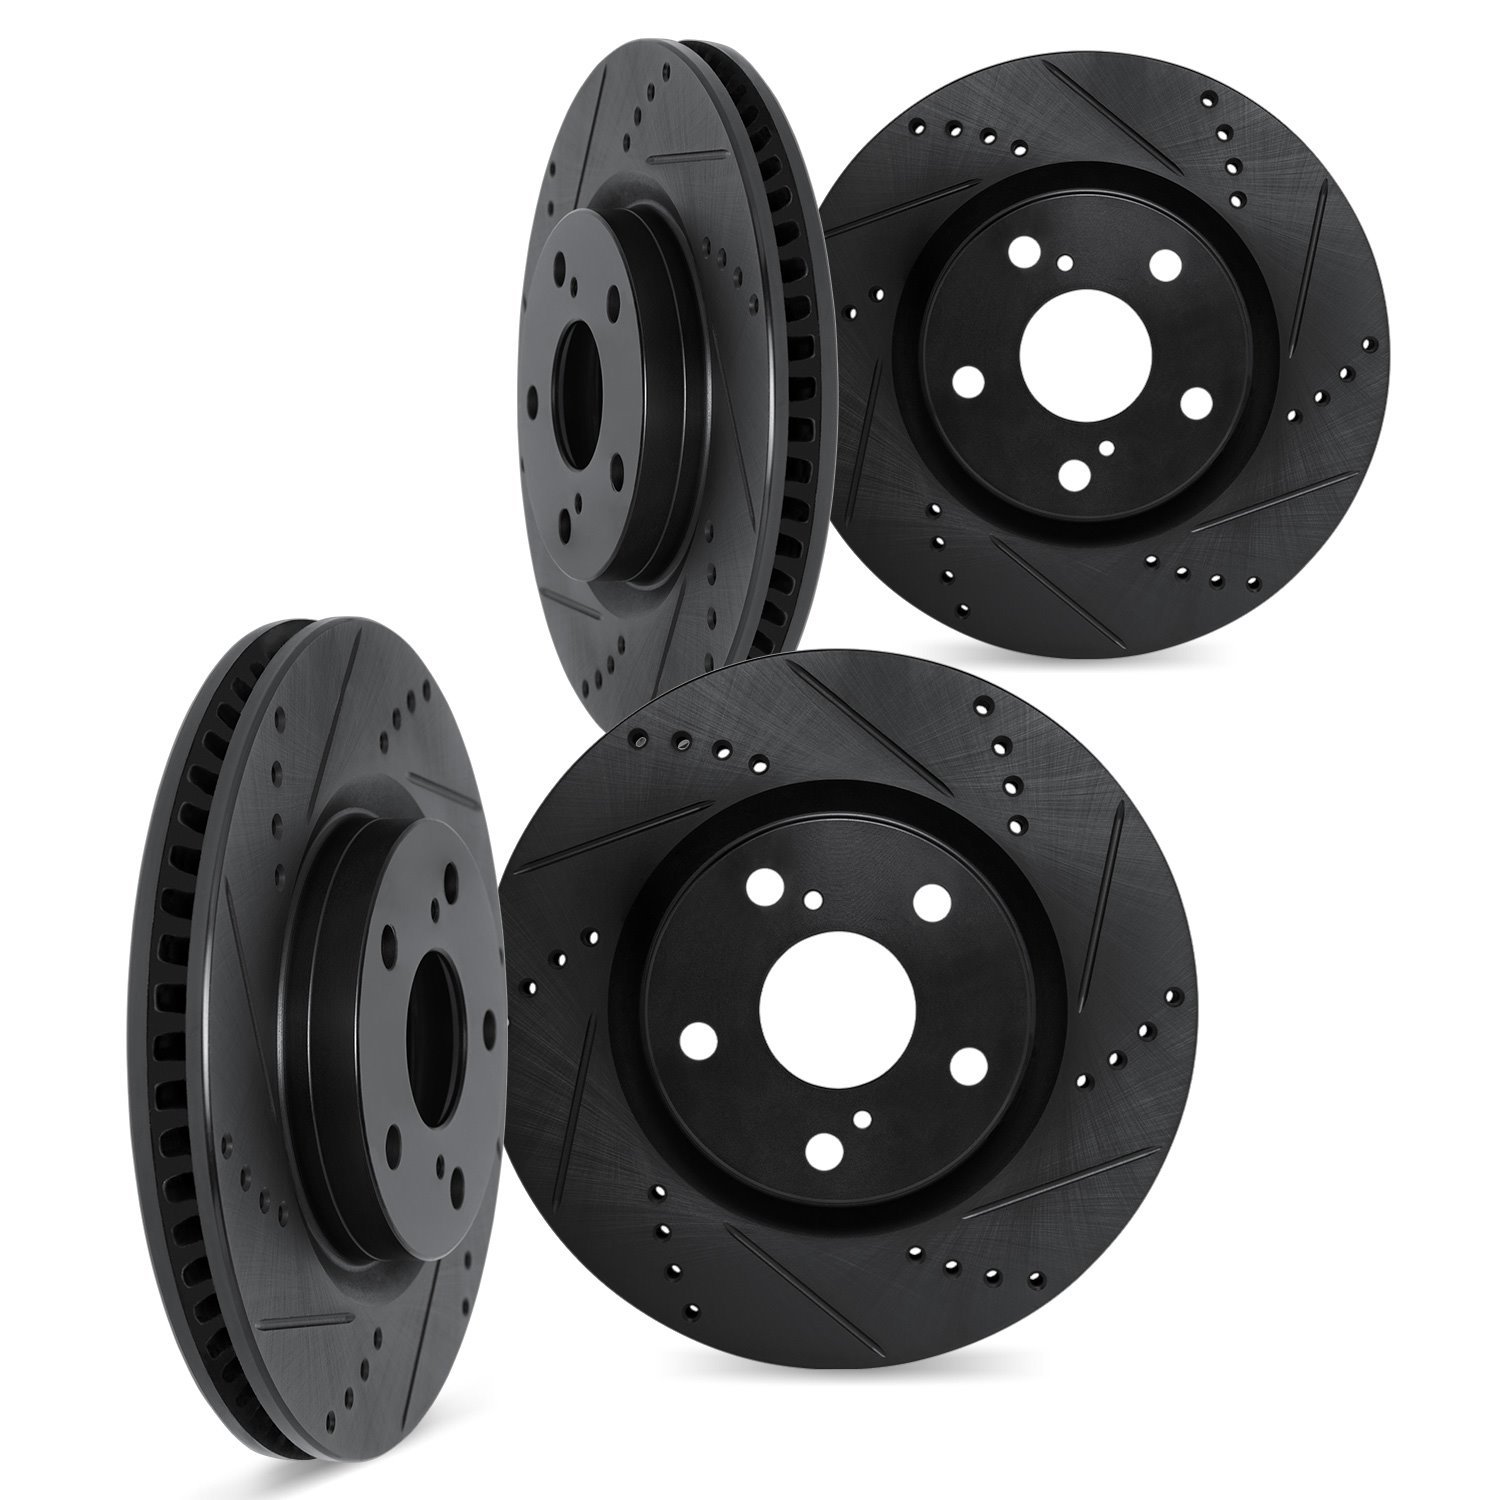 8004-13027 Drilled/Slotted Brake Rotors [Black], 2014-2018 Subaru, Position: Front and Rear